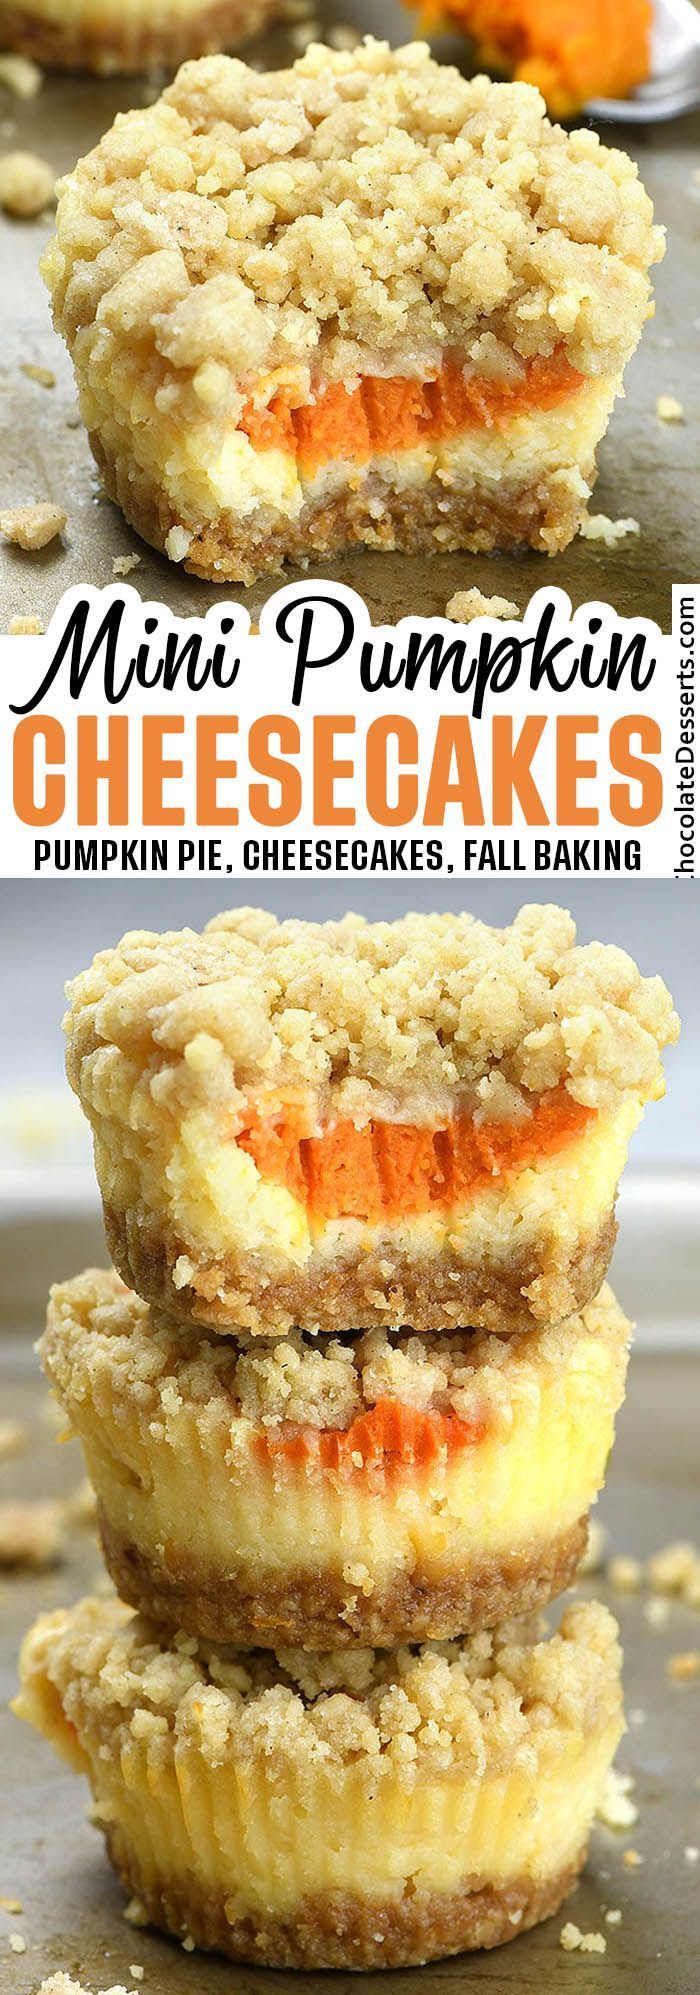 Mini Pumpkin Cheesecakes with Streusel Topping -   18 thanksgiving desserts for a crowd ideas